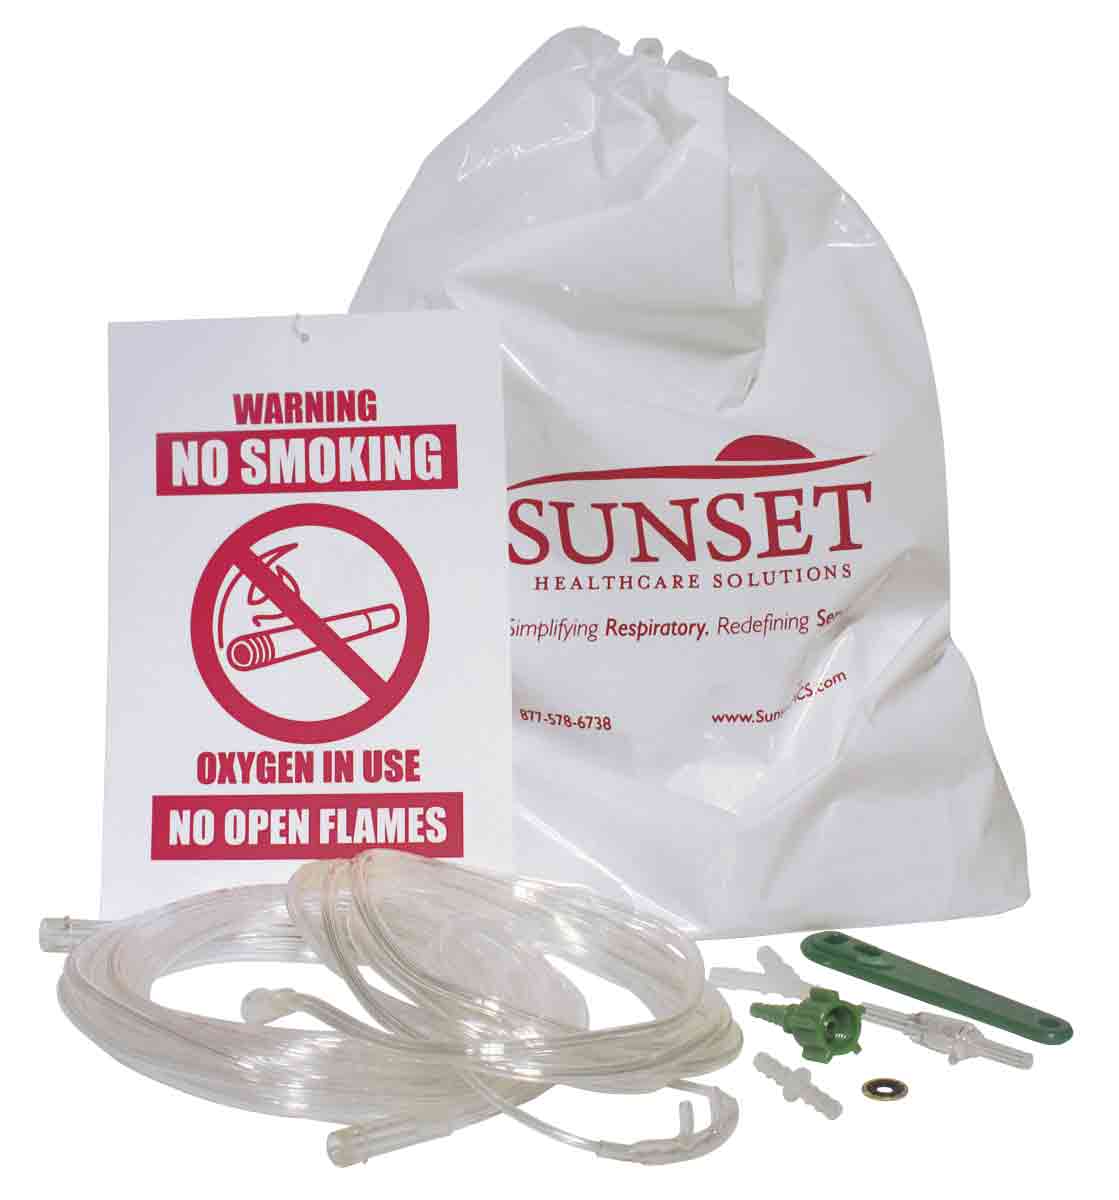 Sunset Healthcare Solutions has created customized oxygen kits that include a three- or six-month supply of cannulas, filters and other accessories.